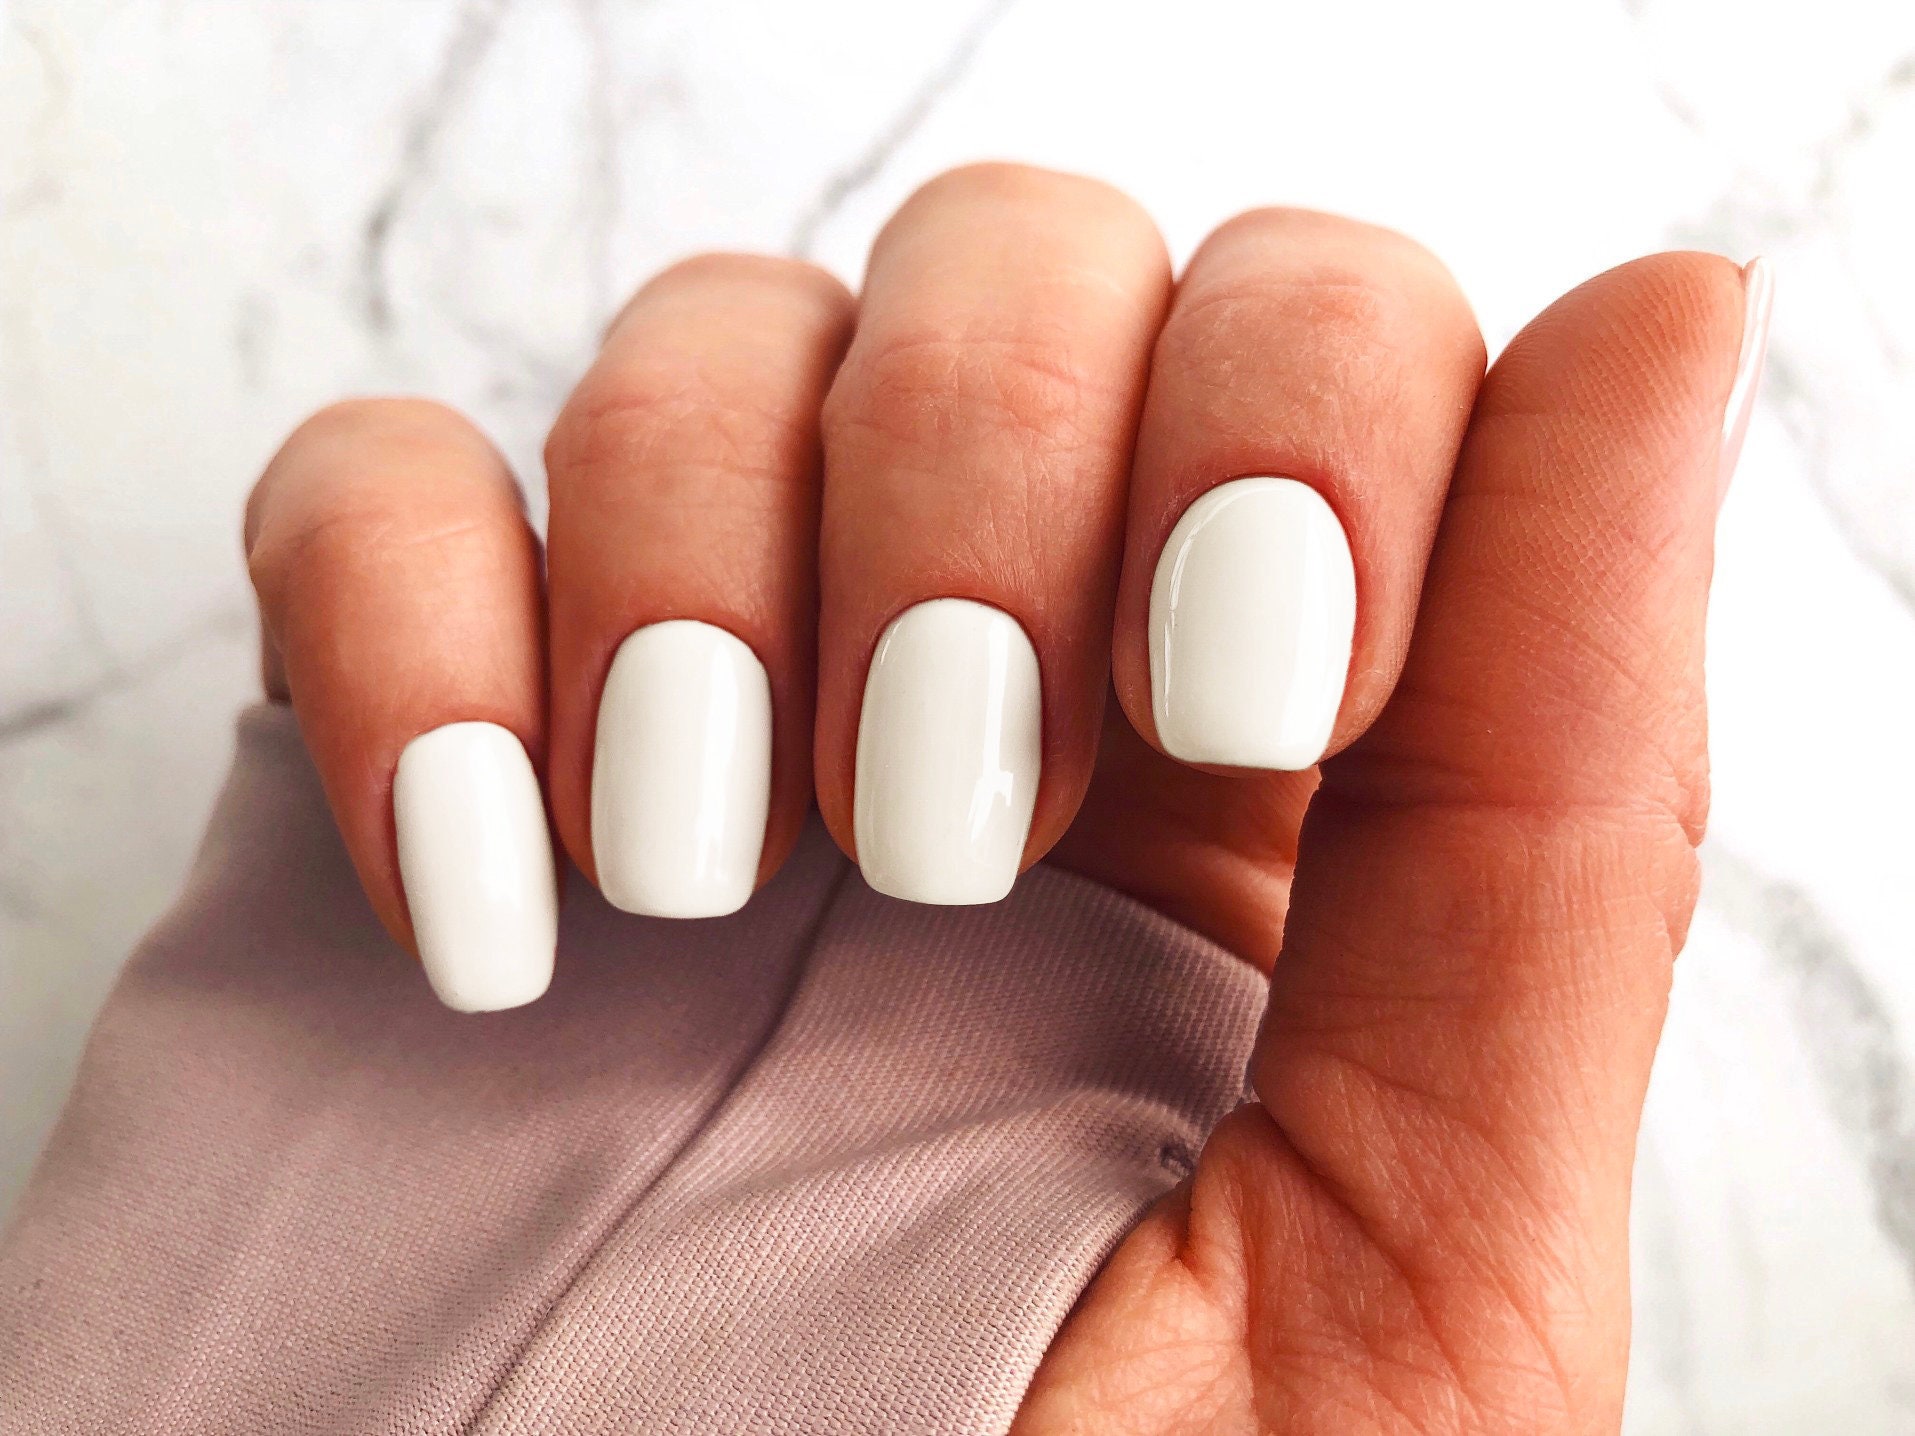 Off White Nail Polish Shades for a Chic Manicure - wide 6